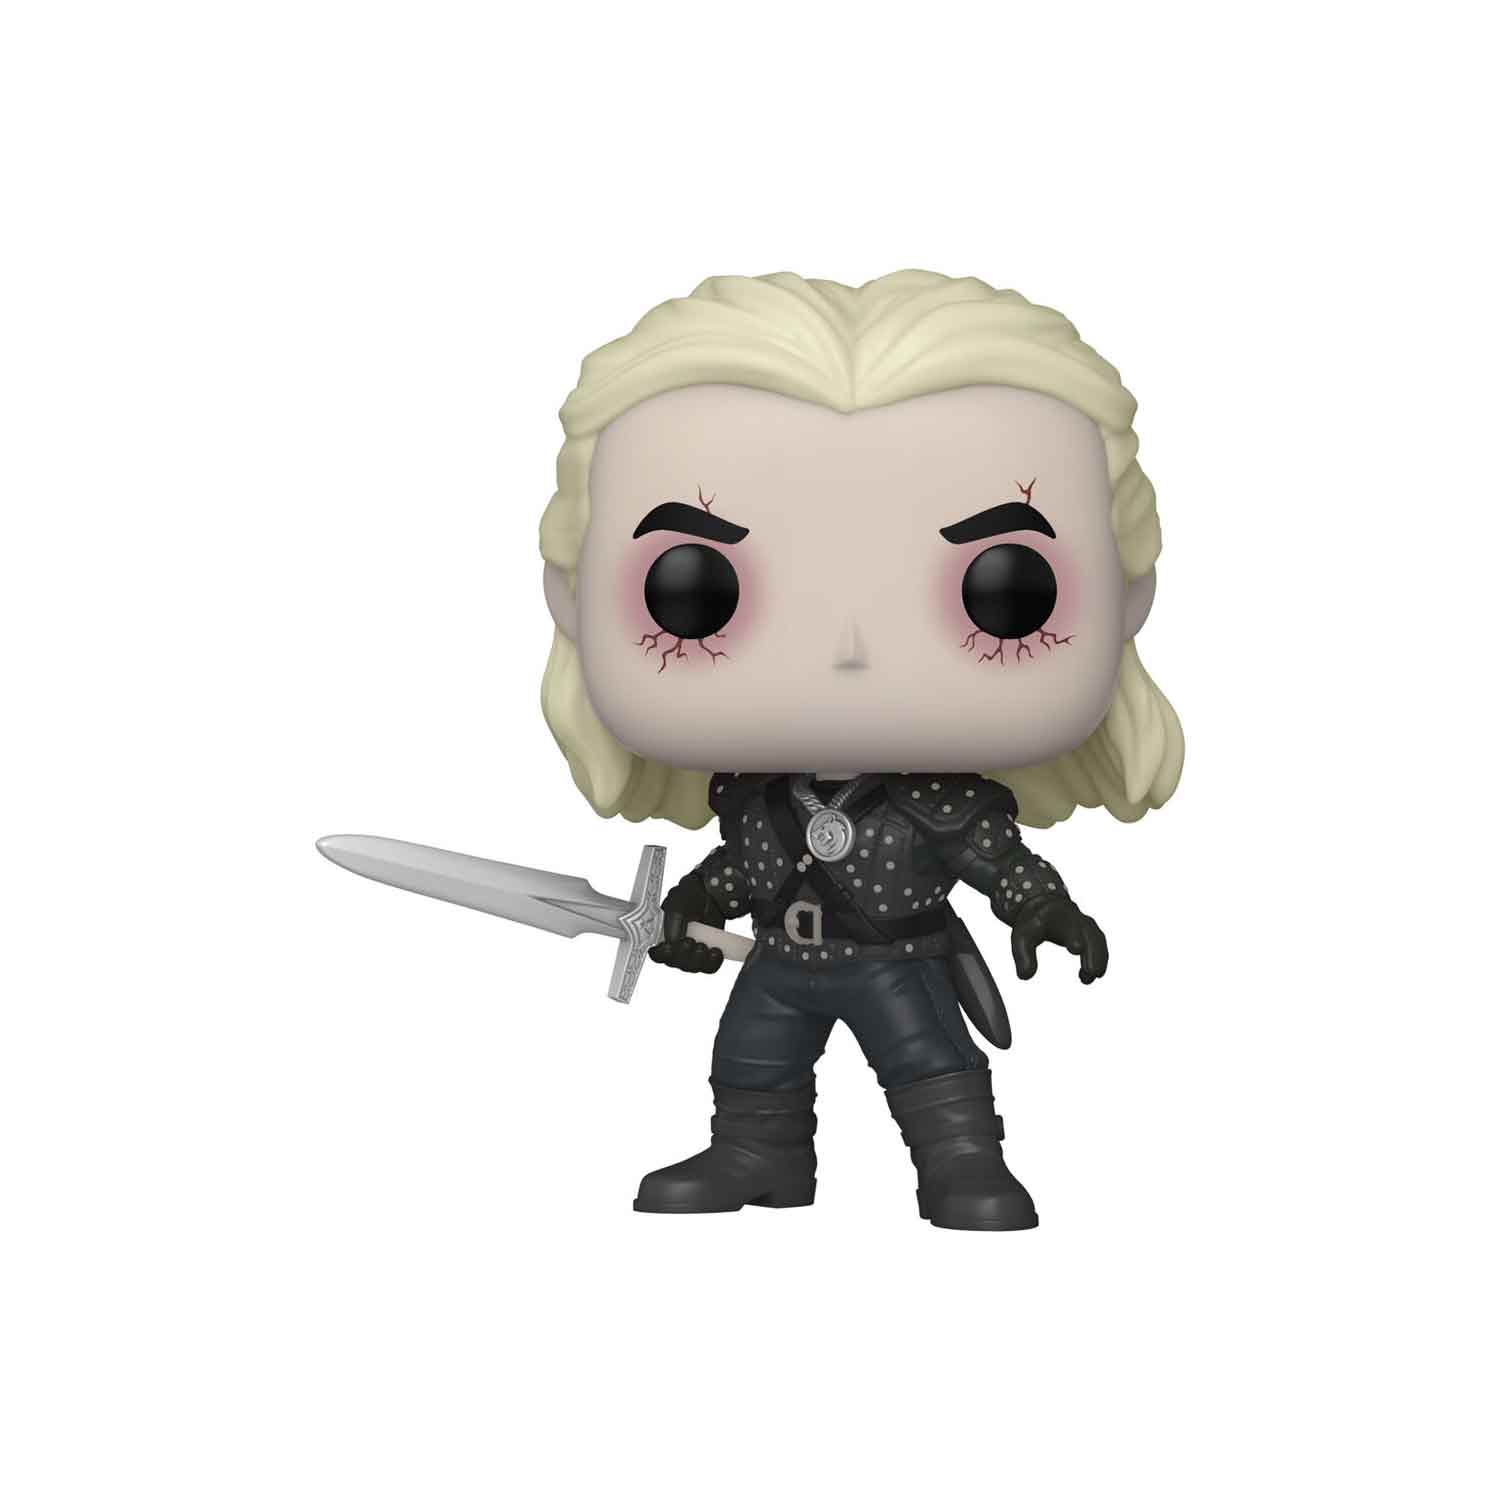 the-witcher-geralt-chase-funko-pop